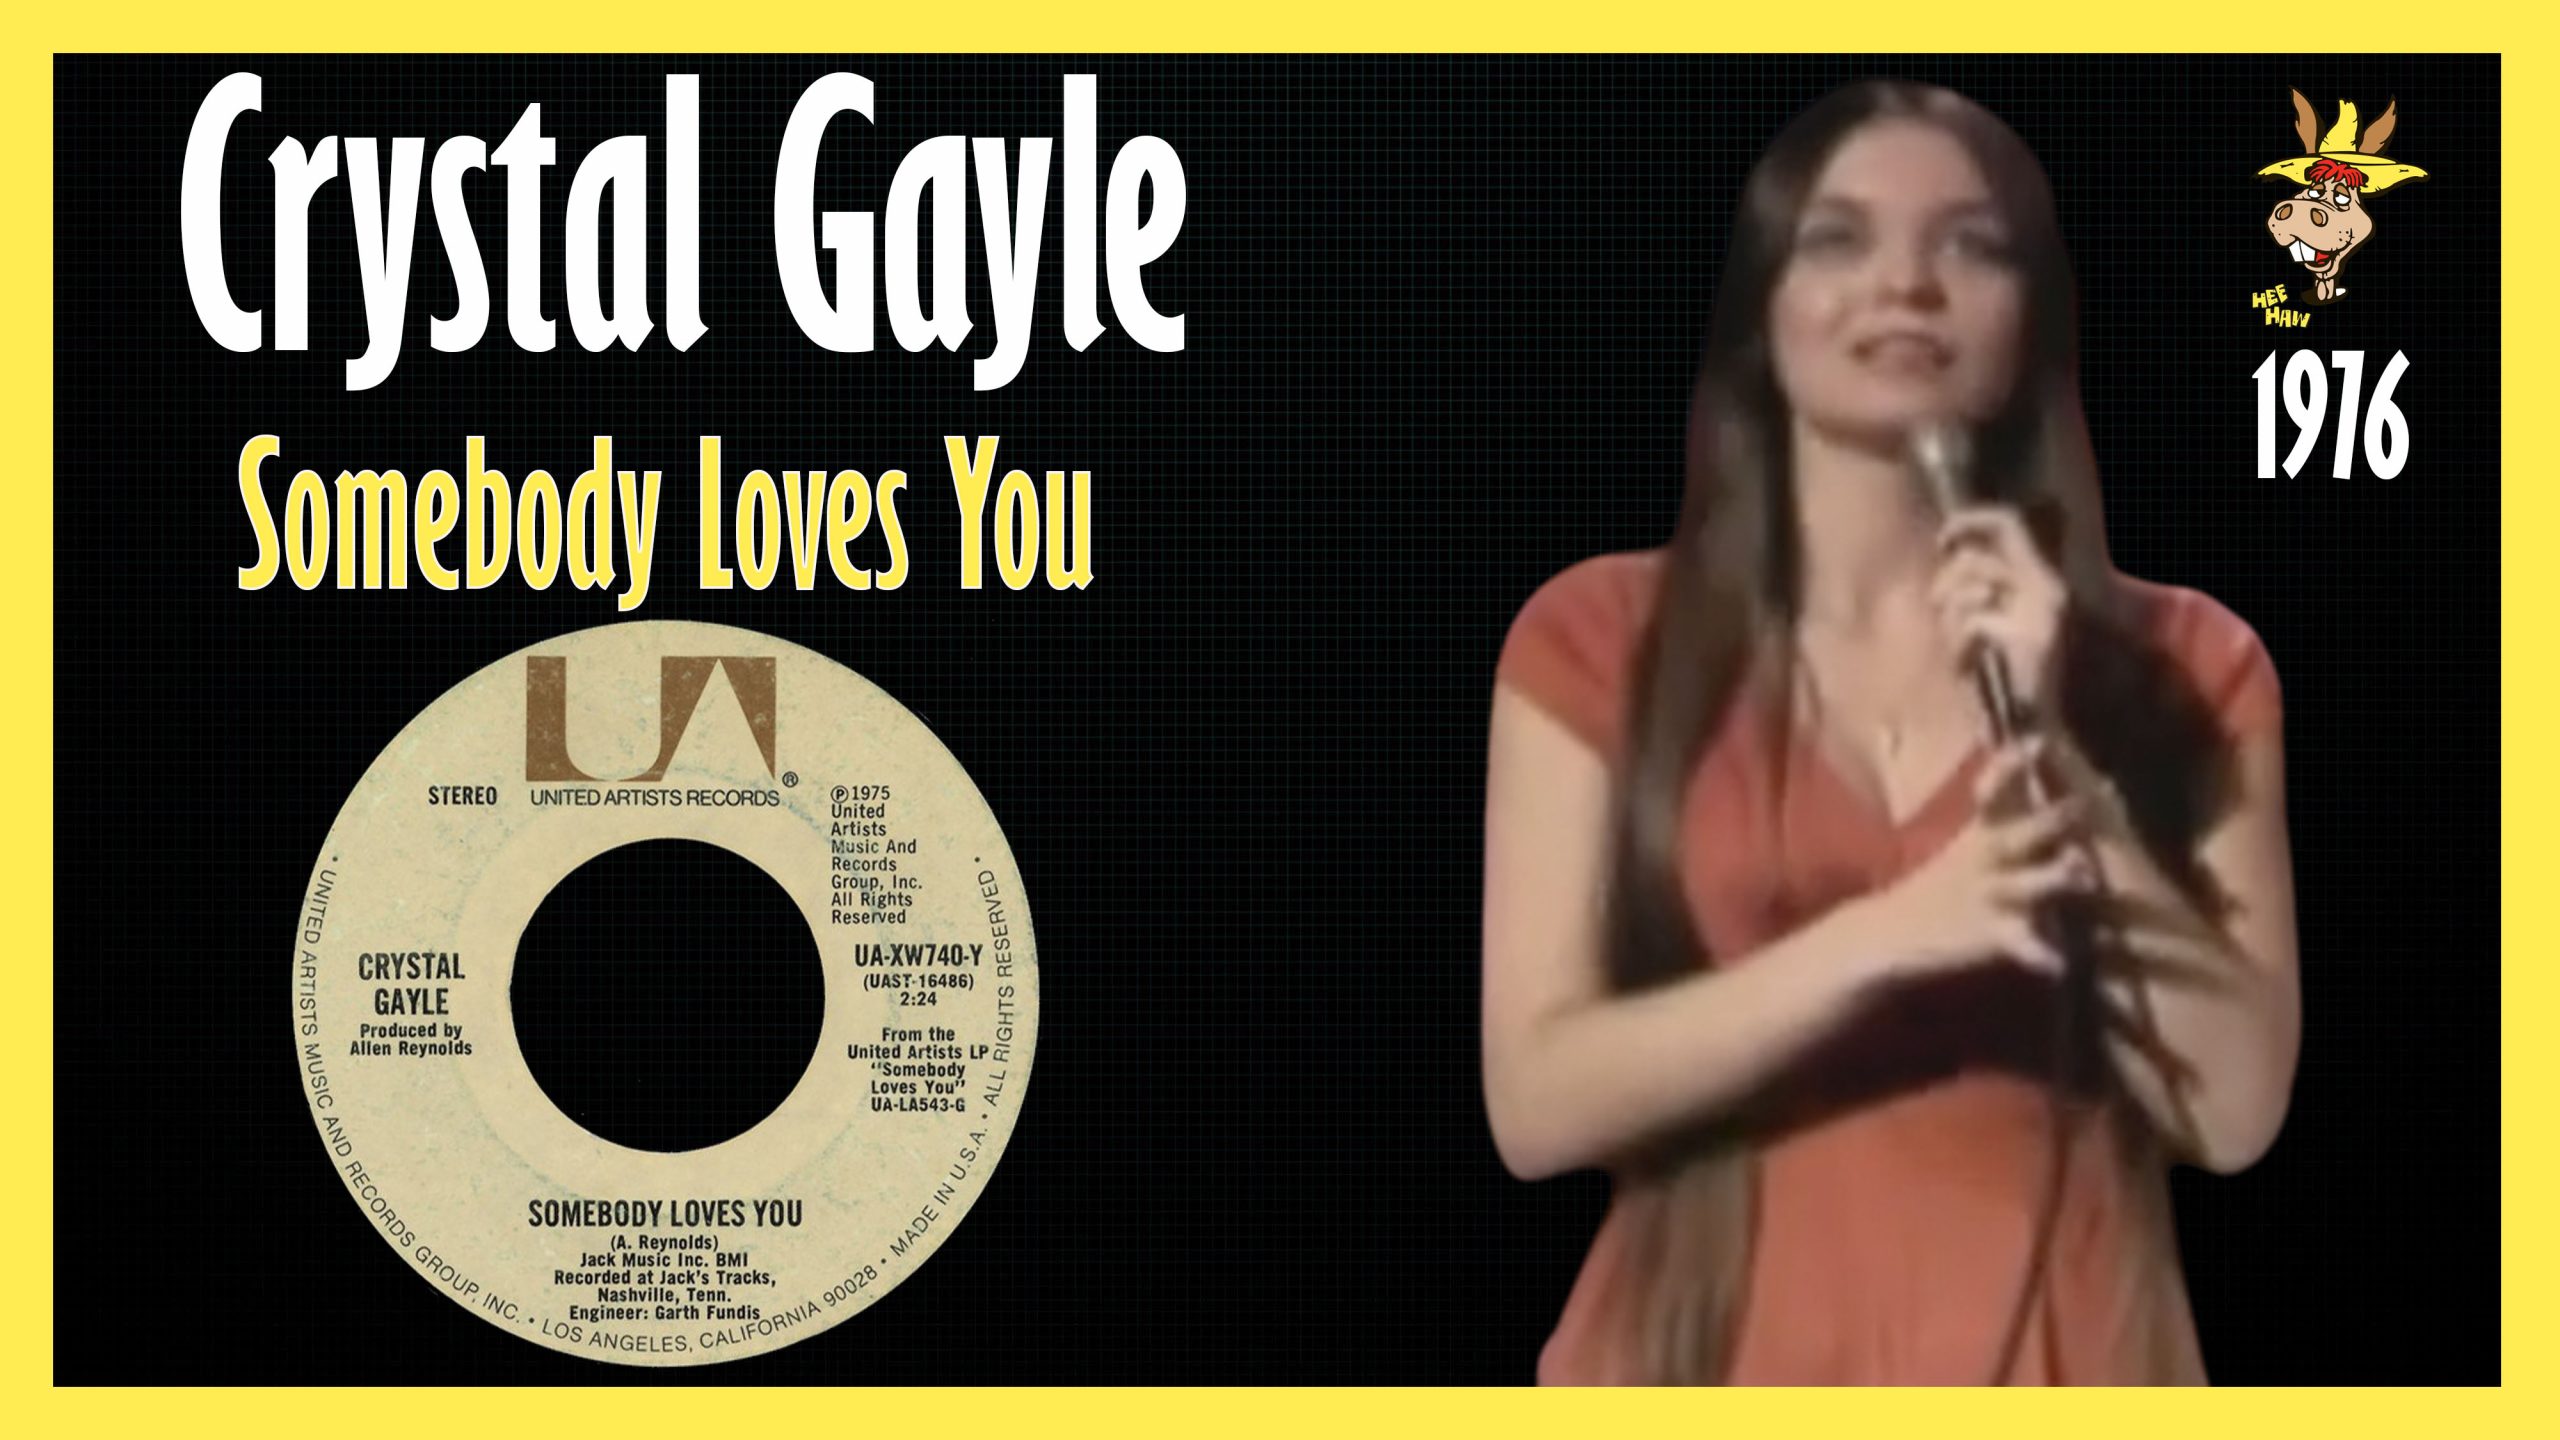 Crystal gayle i don t wanna lose your love